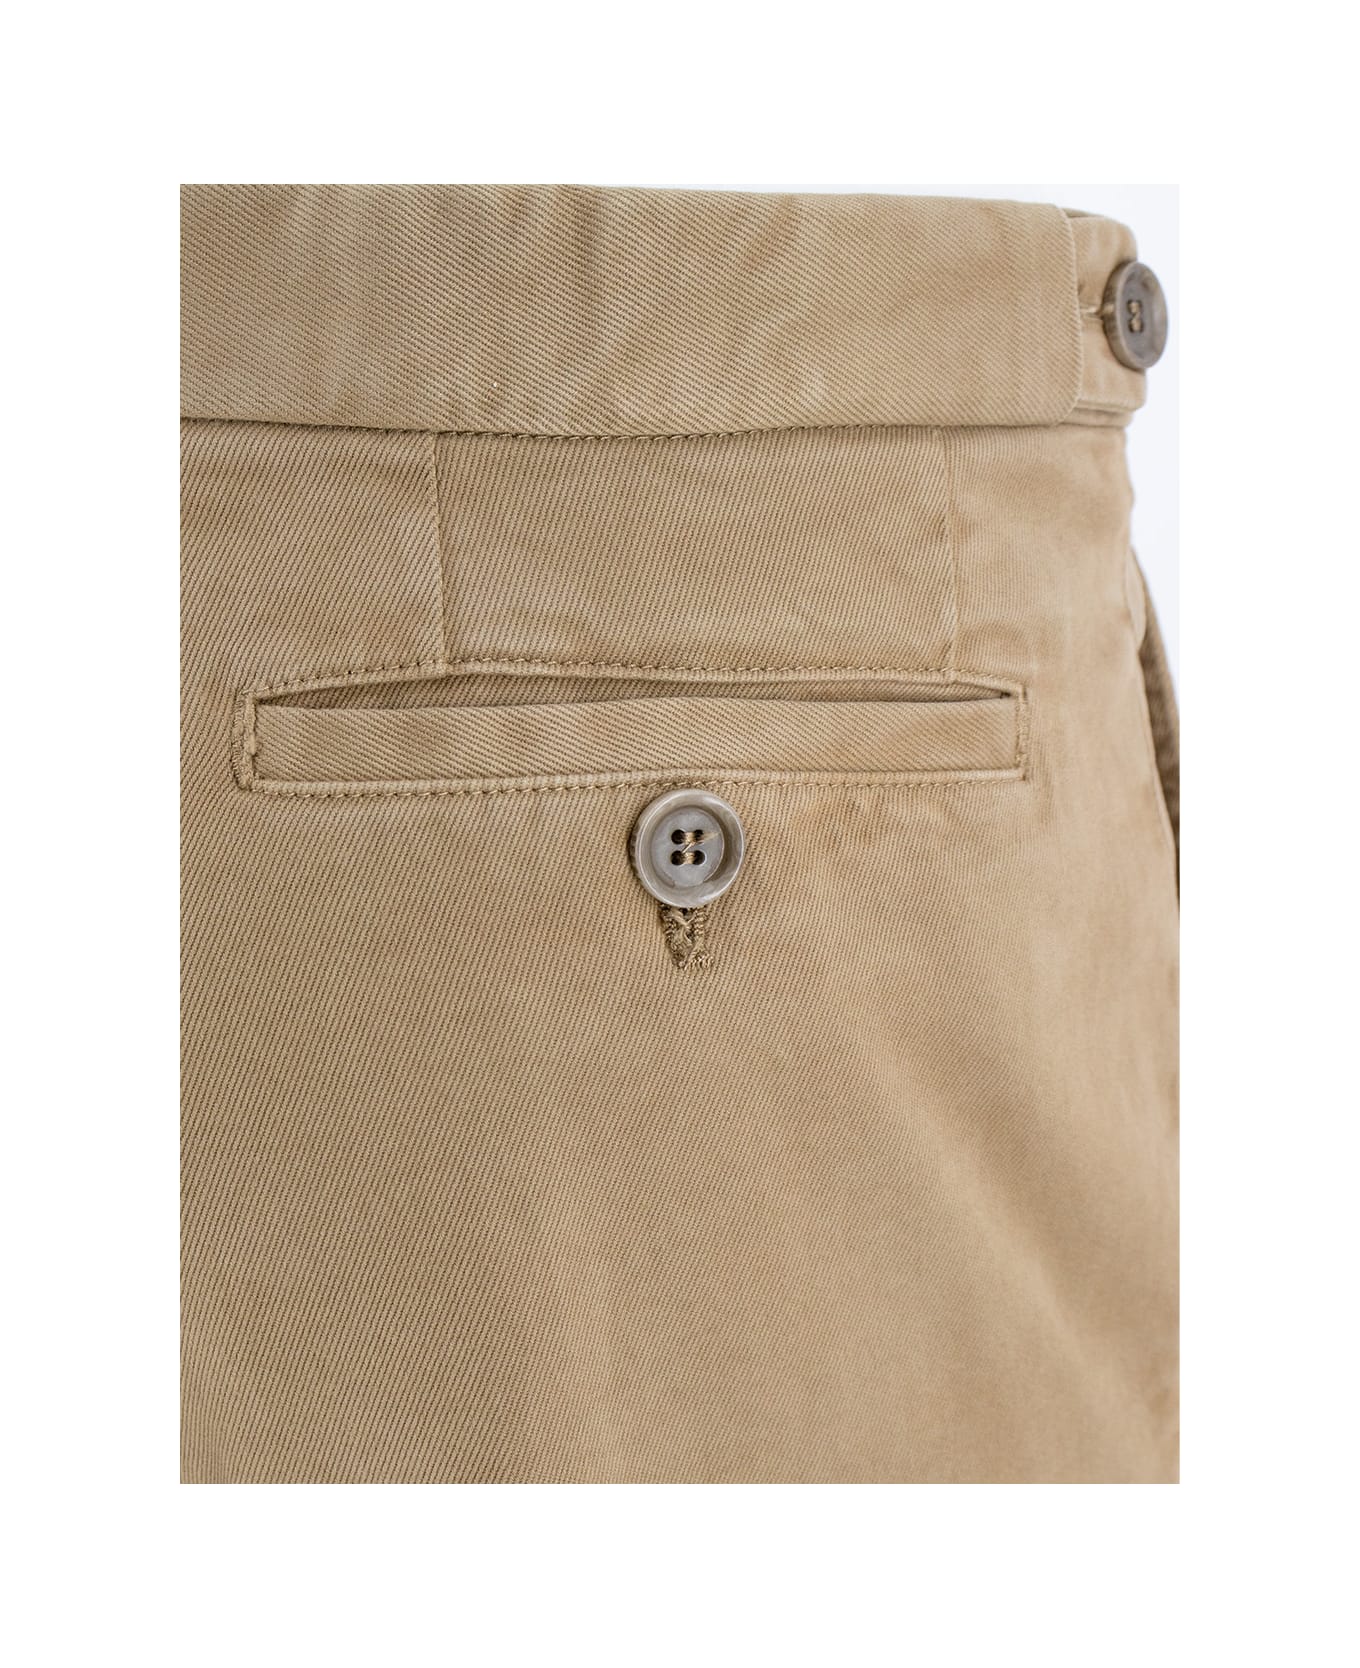 Aspesi Concealed Fitted Trousers - BEIGE